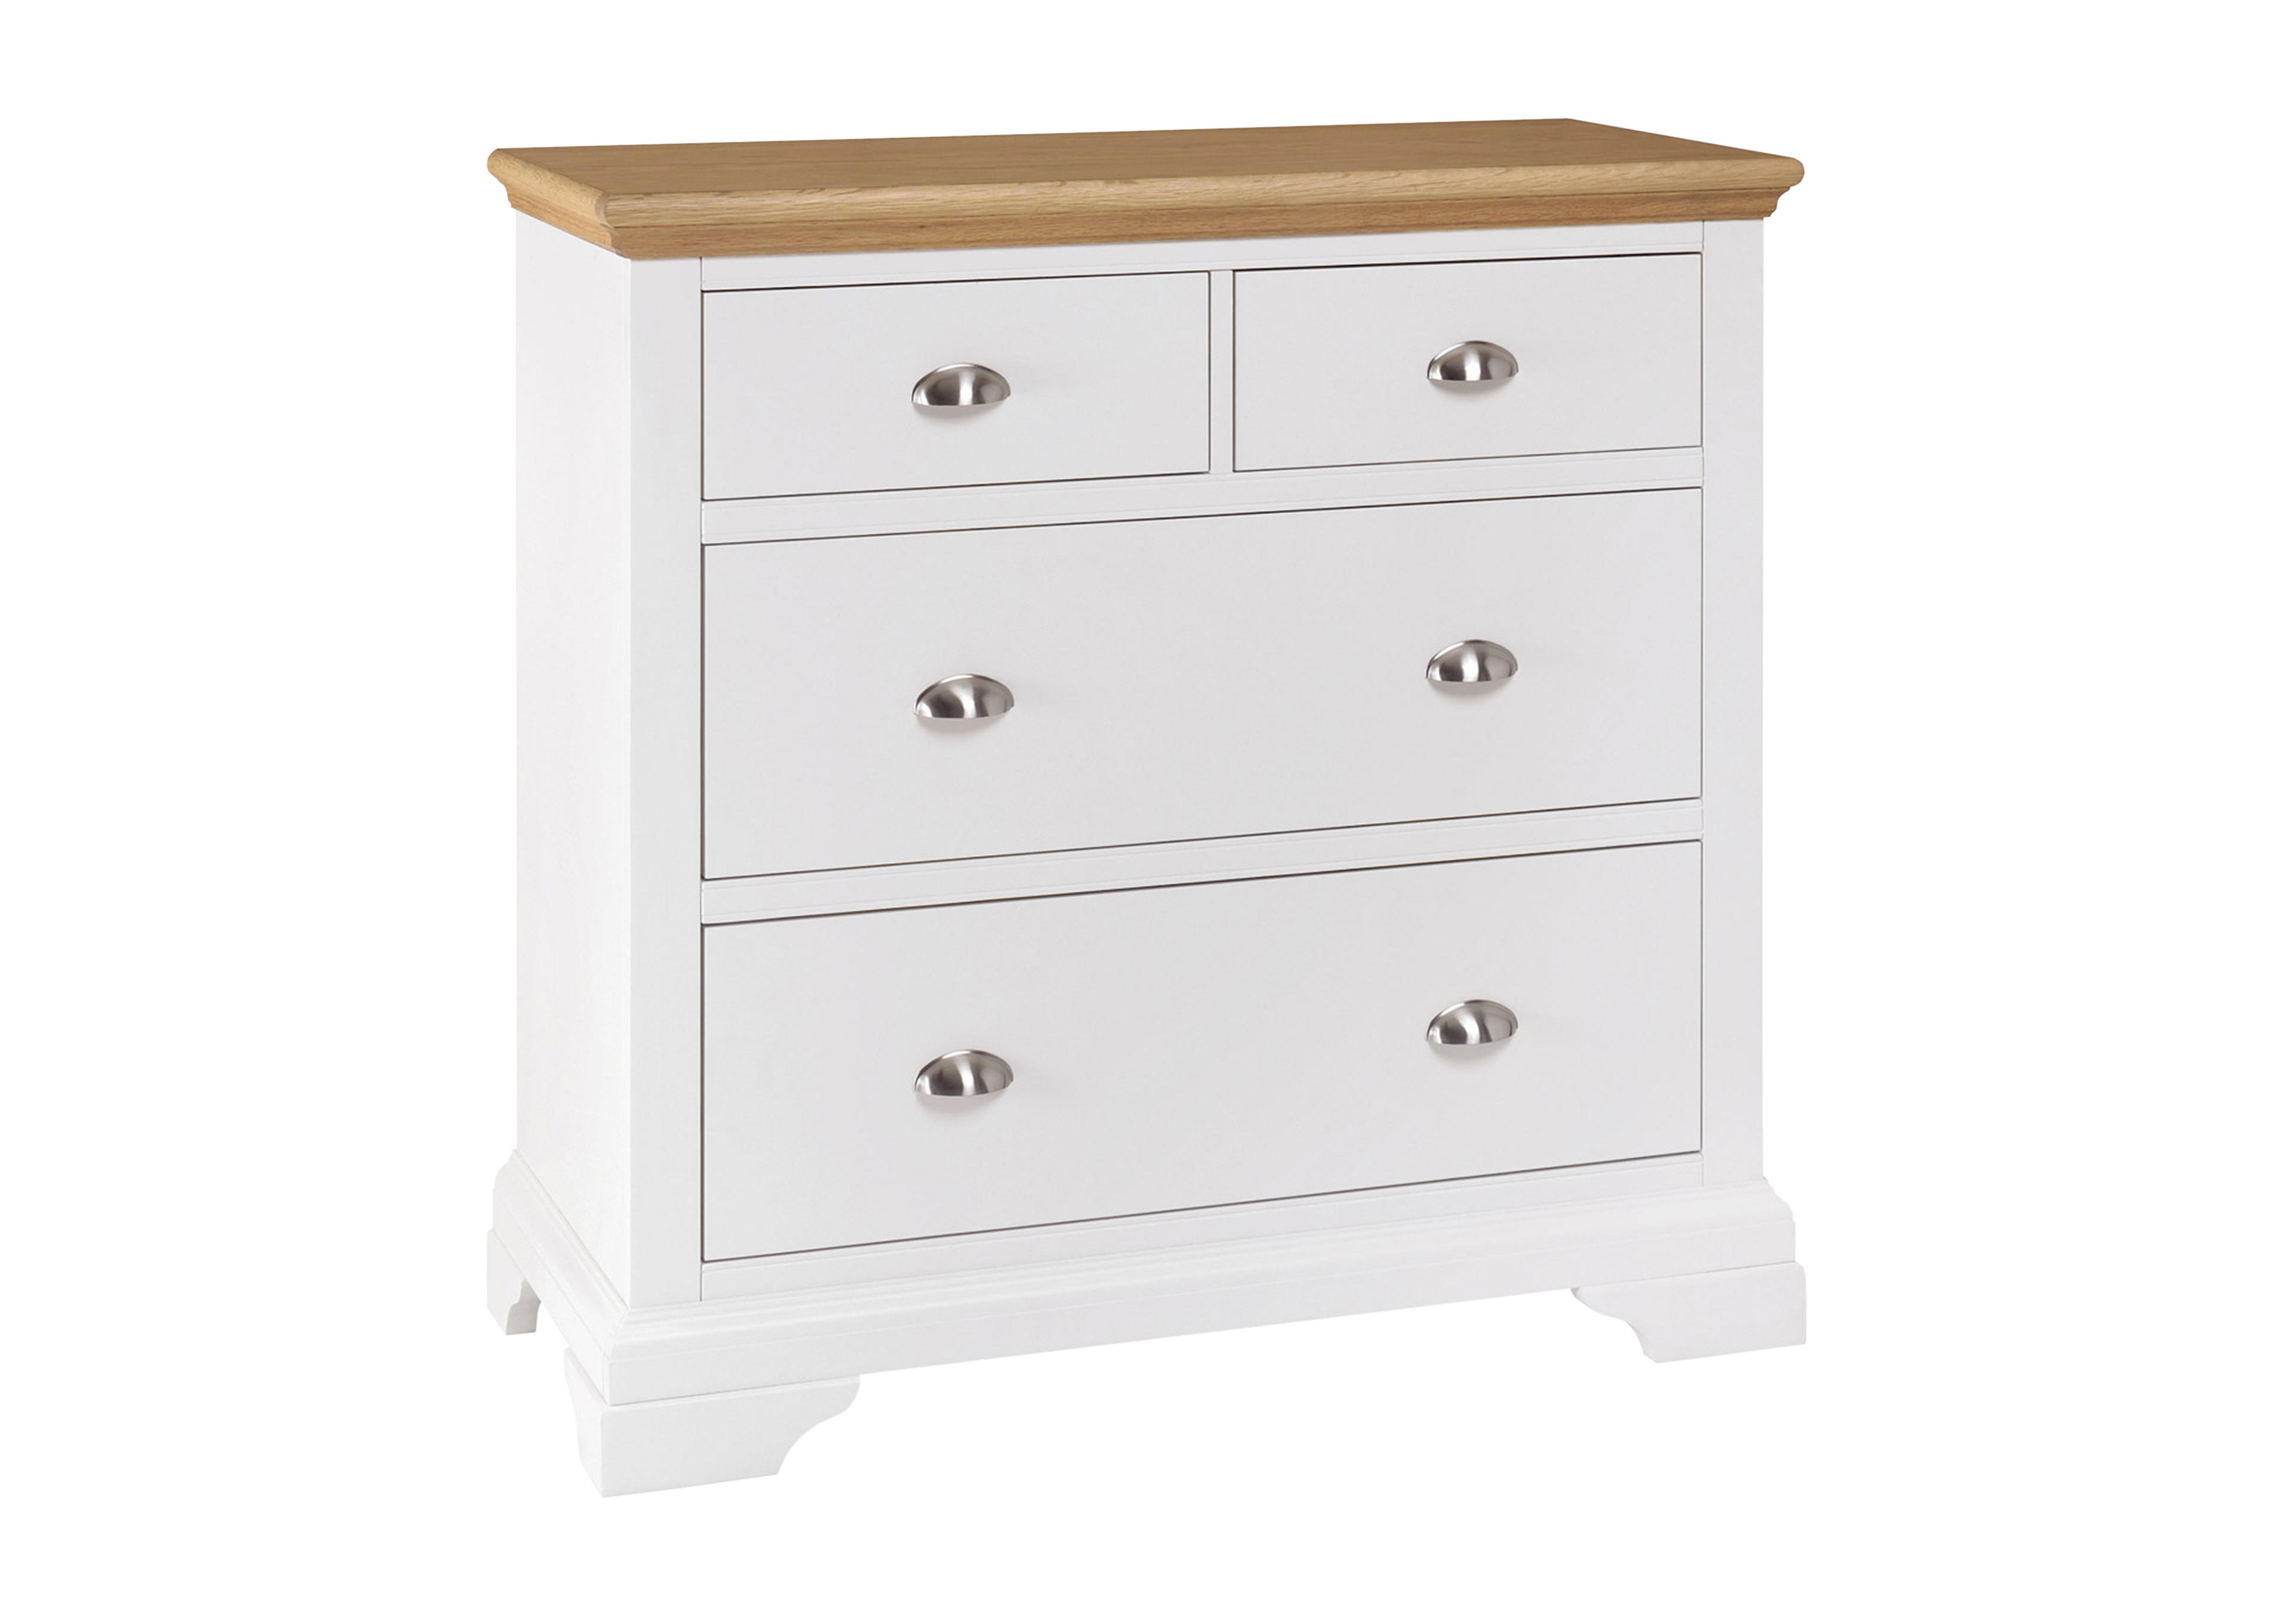 Emily 4 Drawer Chest in Ivory And Oak on Furniture Village